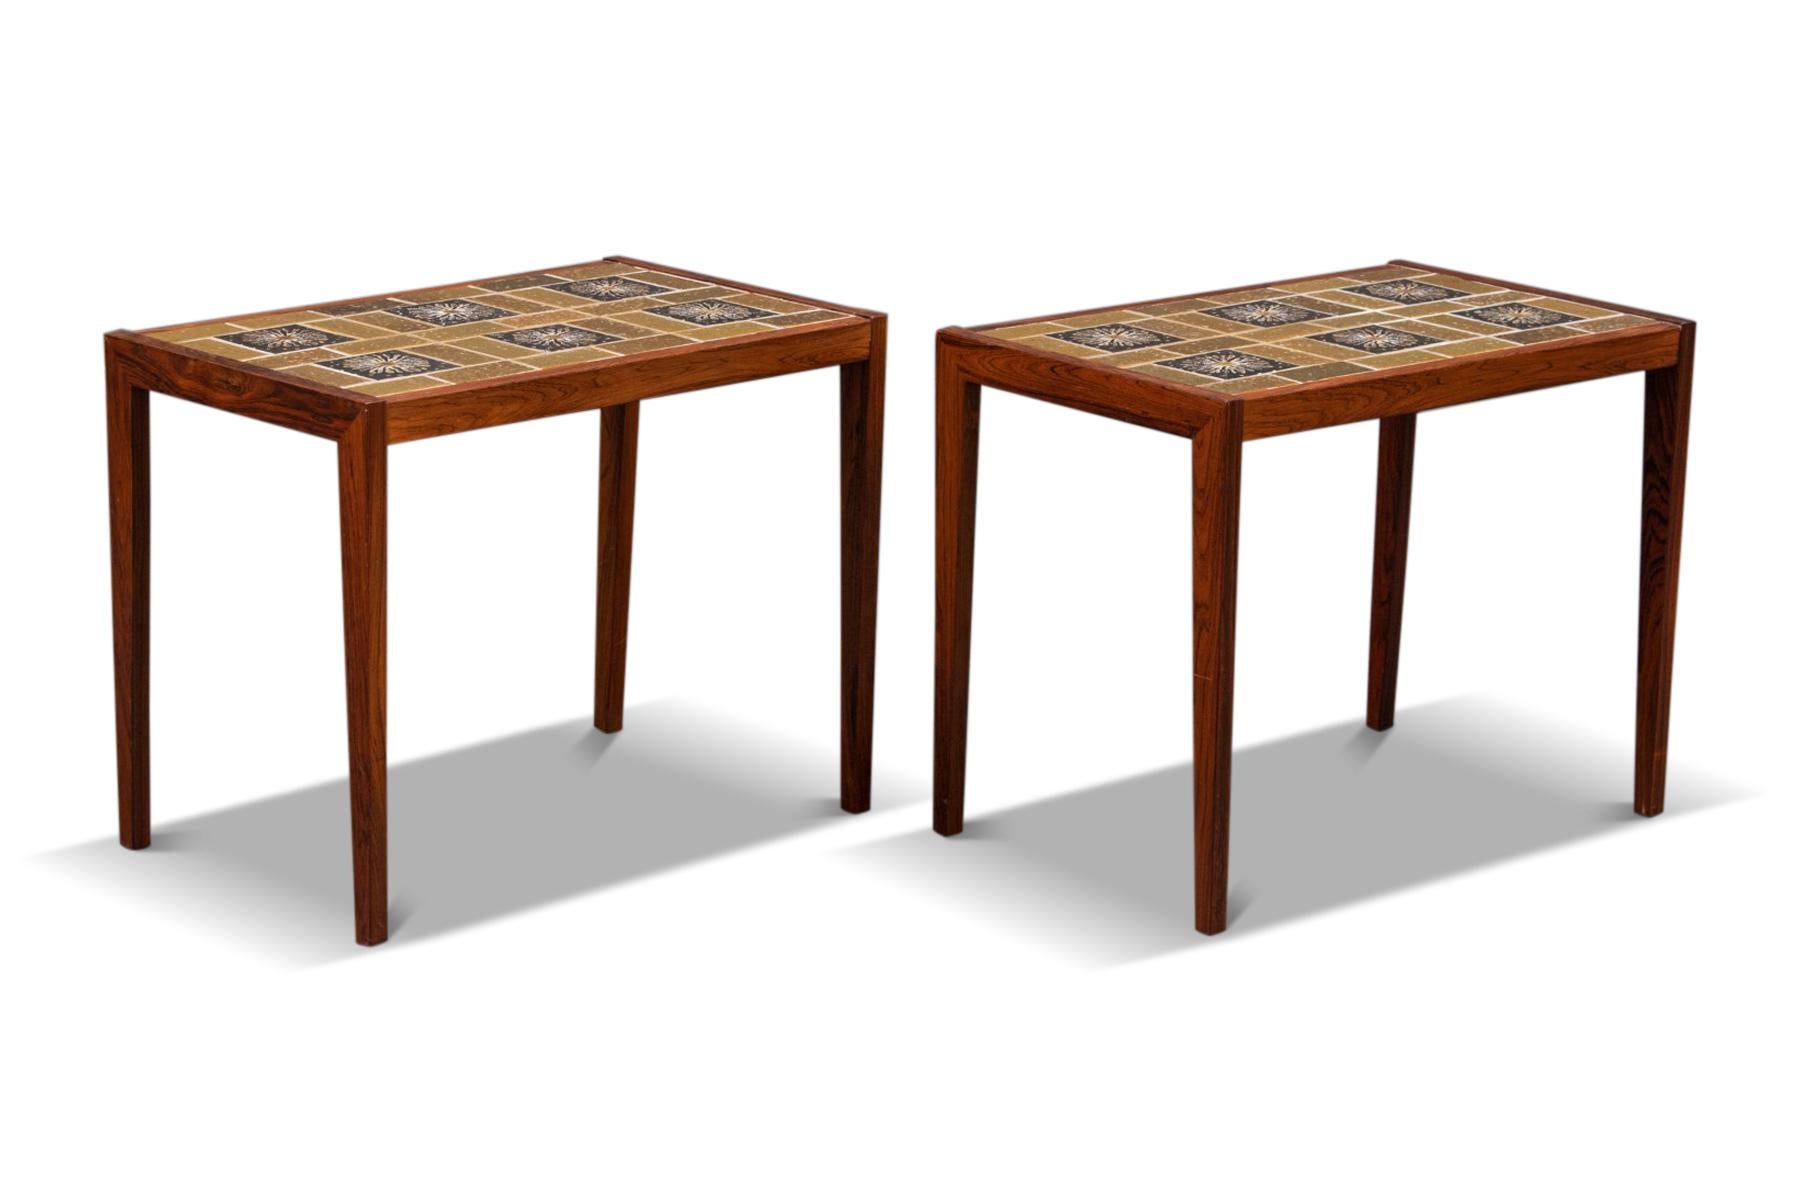 Pair of Danish Modern Side Tables in Rosewood + Tile In Good Condition For Sale In Berkeley, CA